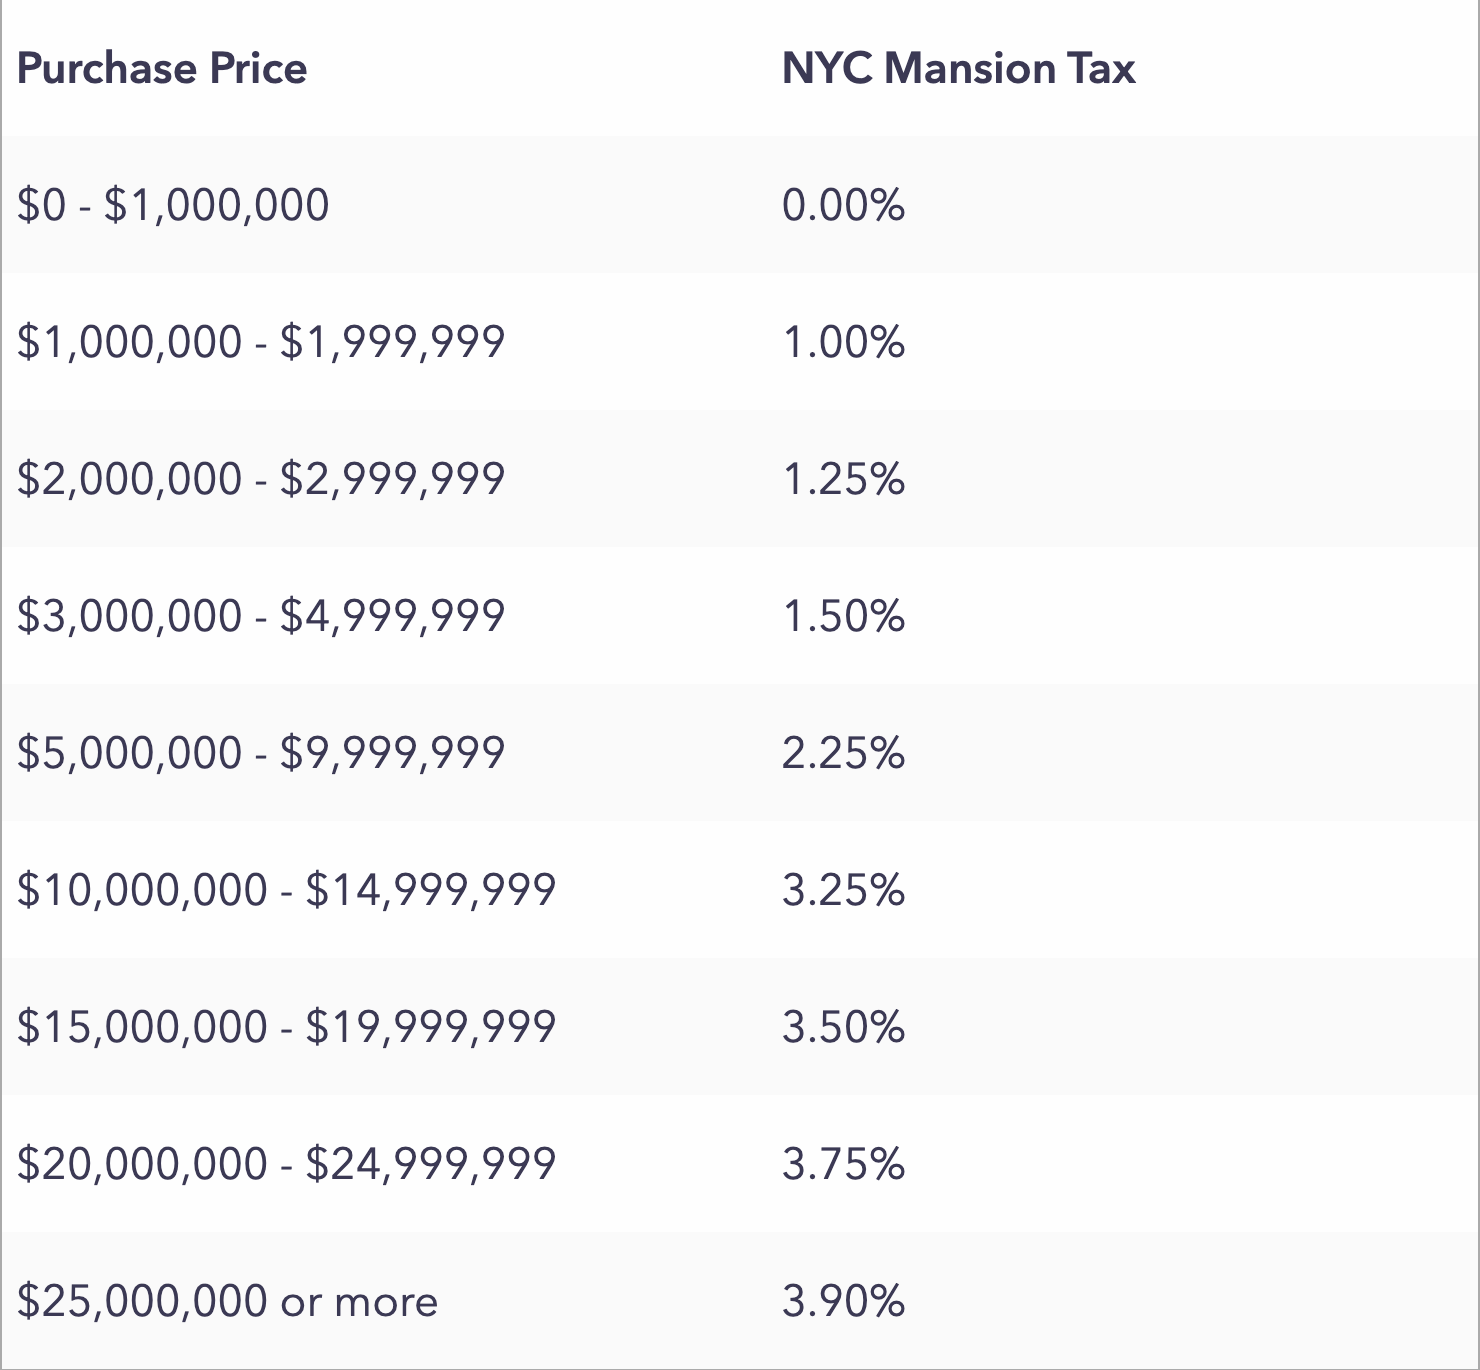 NYC Mansion Tax by Property Value
